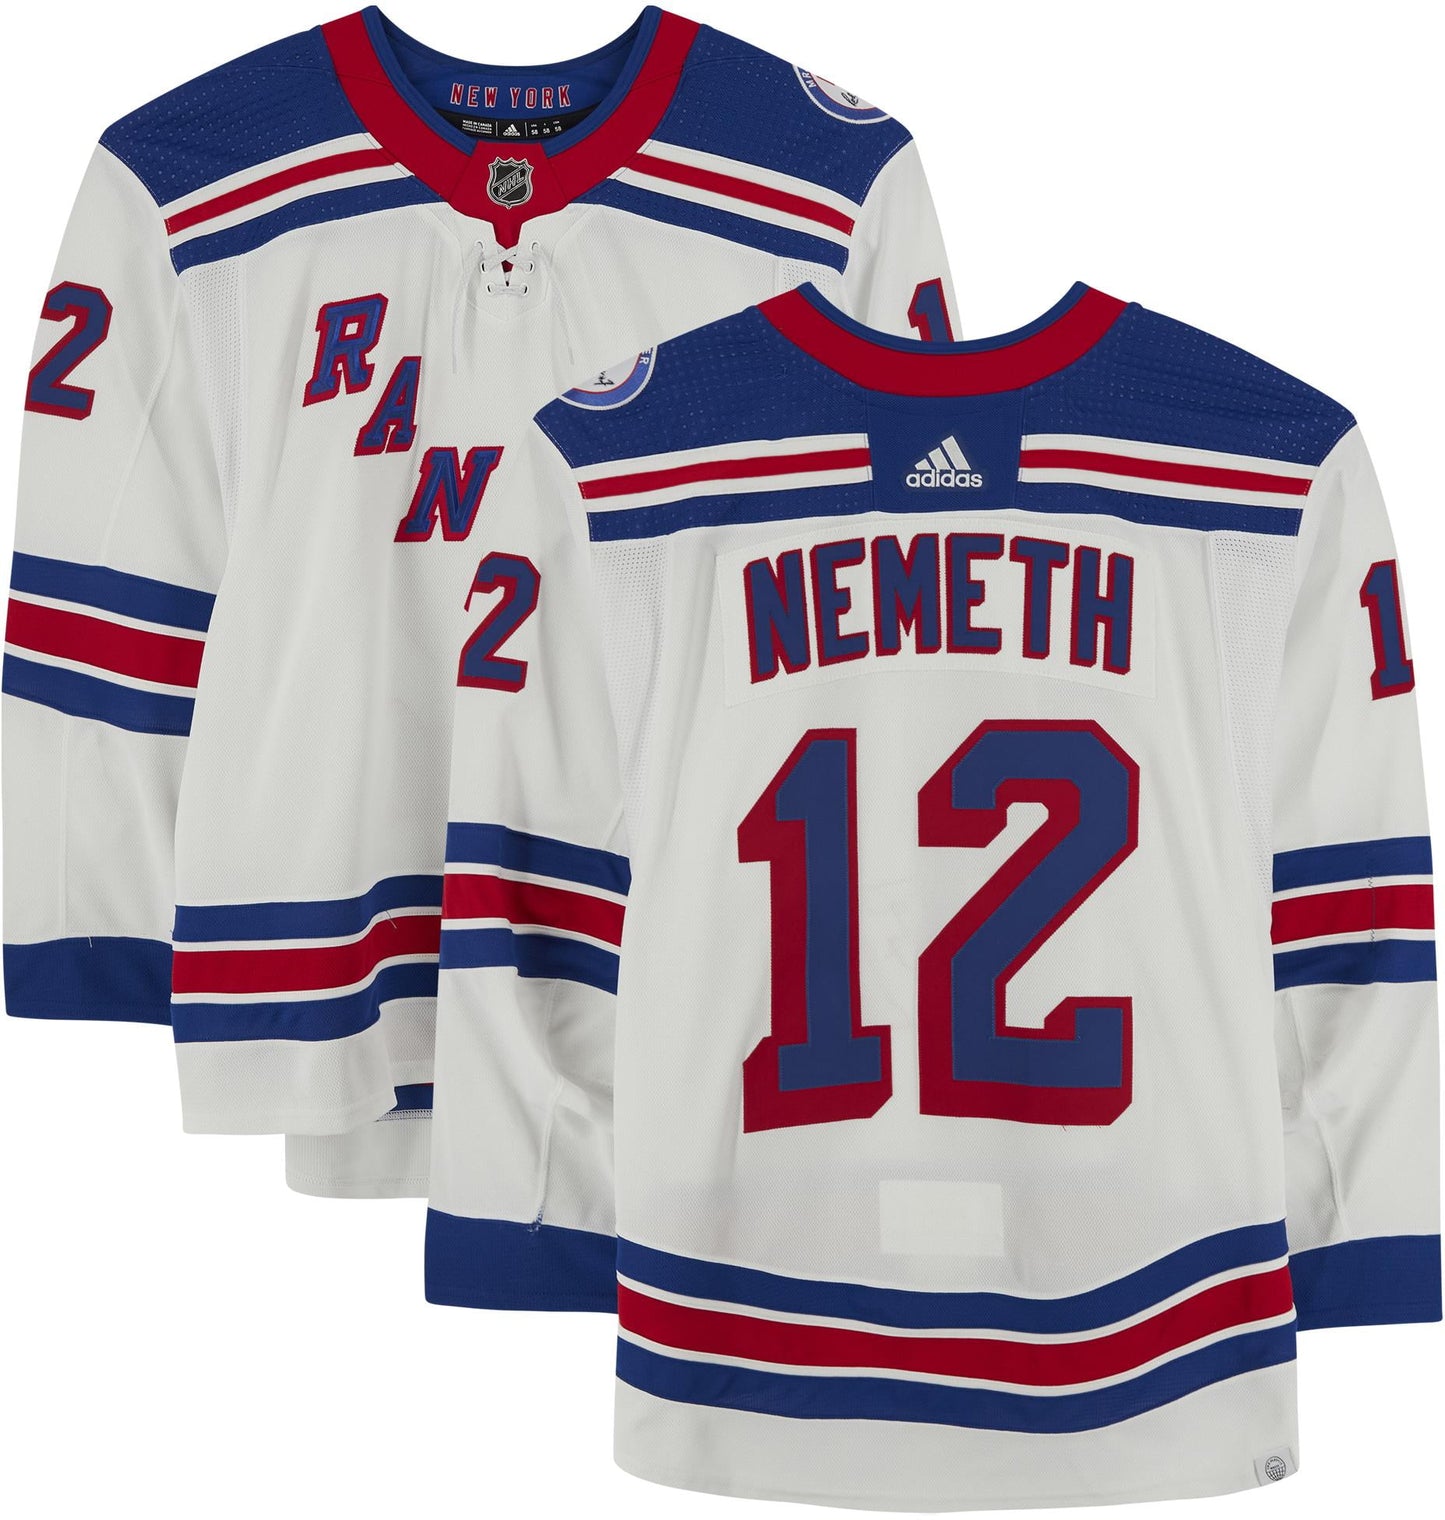 Patrik Nemeth New York Rangers Game-Used #12 White Round 1 Jersey Worn During the First Round of the 2022 Stanley Cup Playoffs vs. Pittsburgh Penguins on May 7, 9 and 13, 2022 - Size 58 - Fanatics